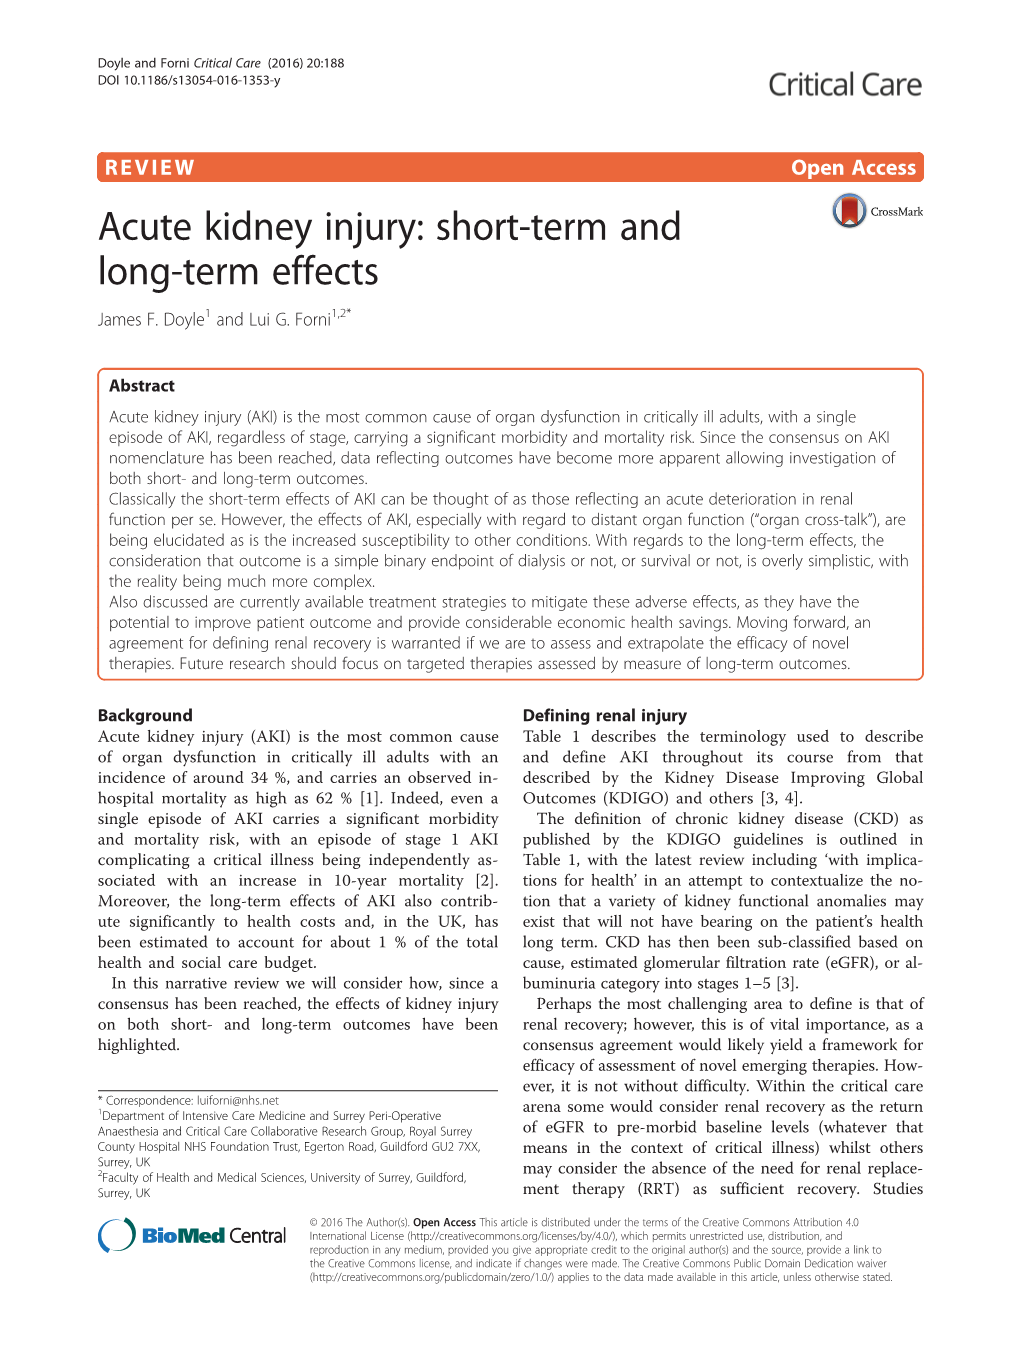 Acute Kidney Injury: Short-Term and Long-Term Effects James F